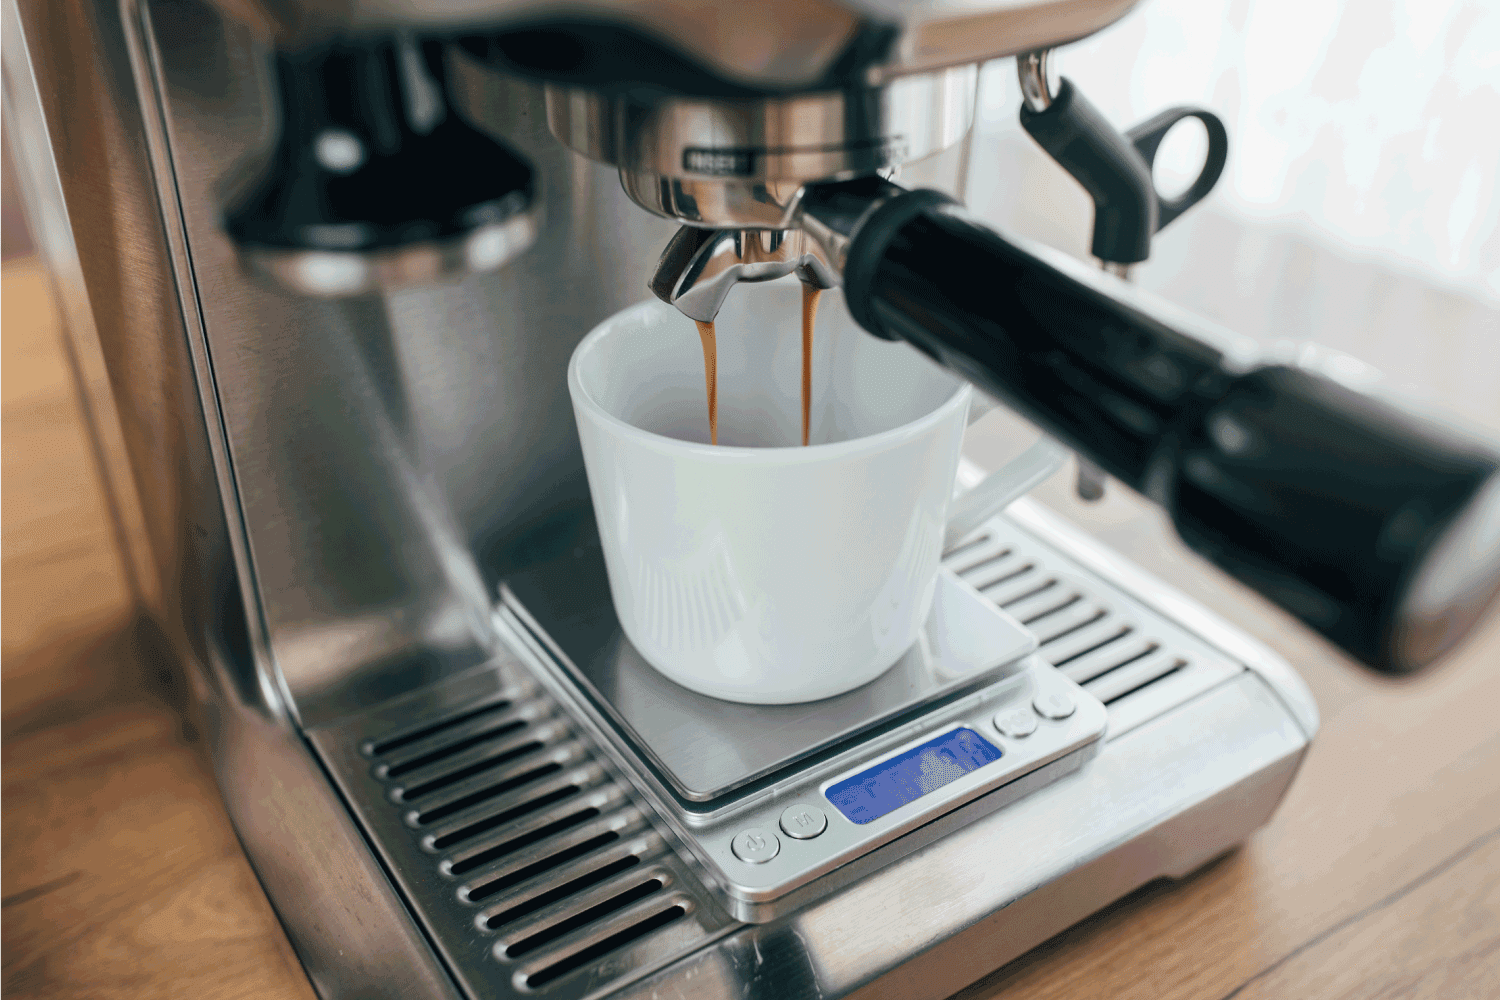 white cup on a small scale espresso machine dripping with coffee. Can An Espresso Machine Explode